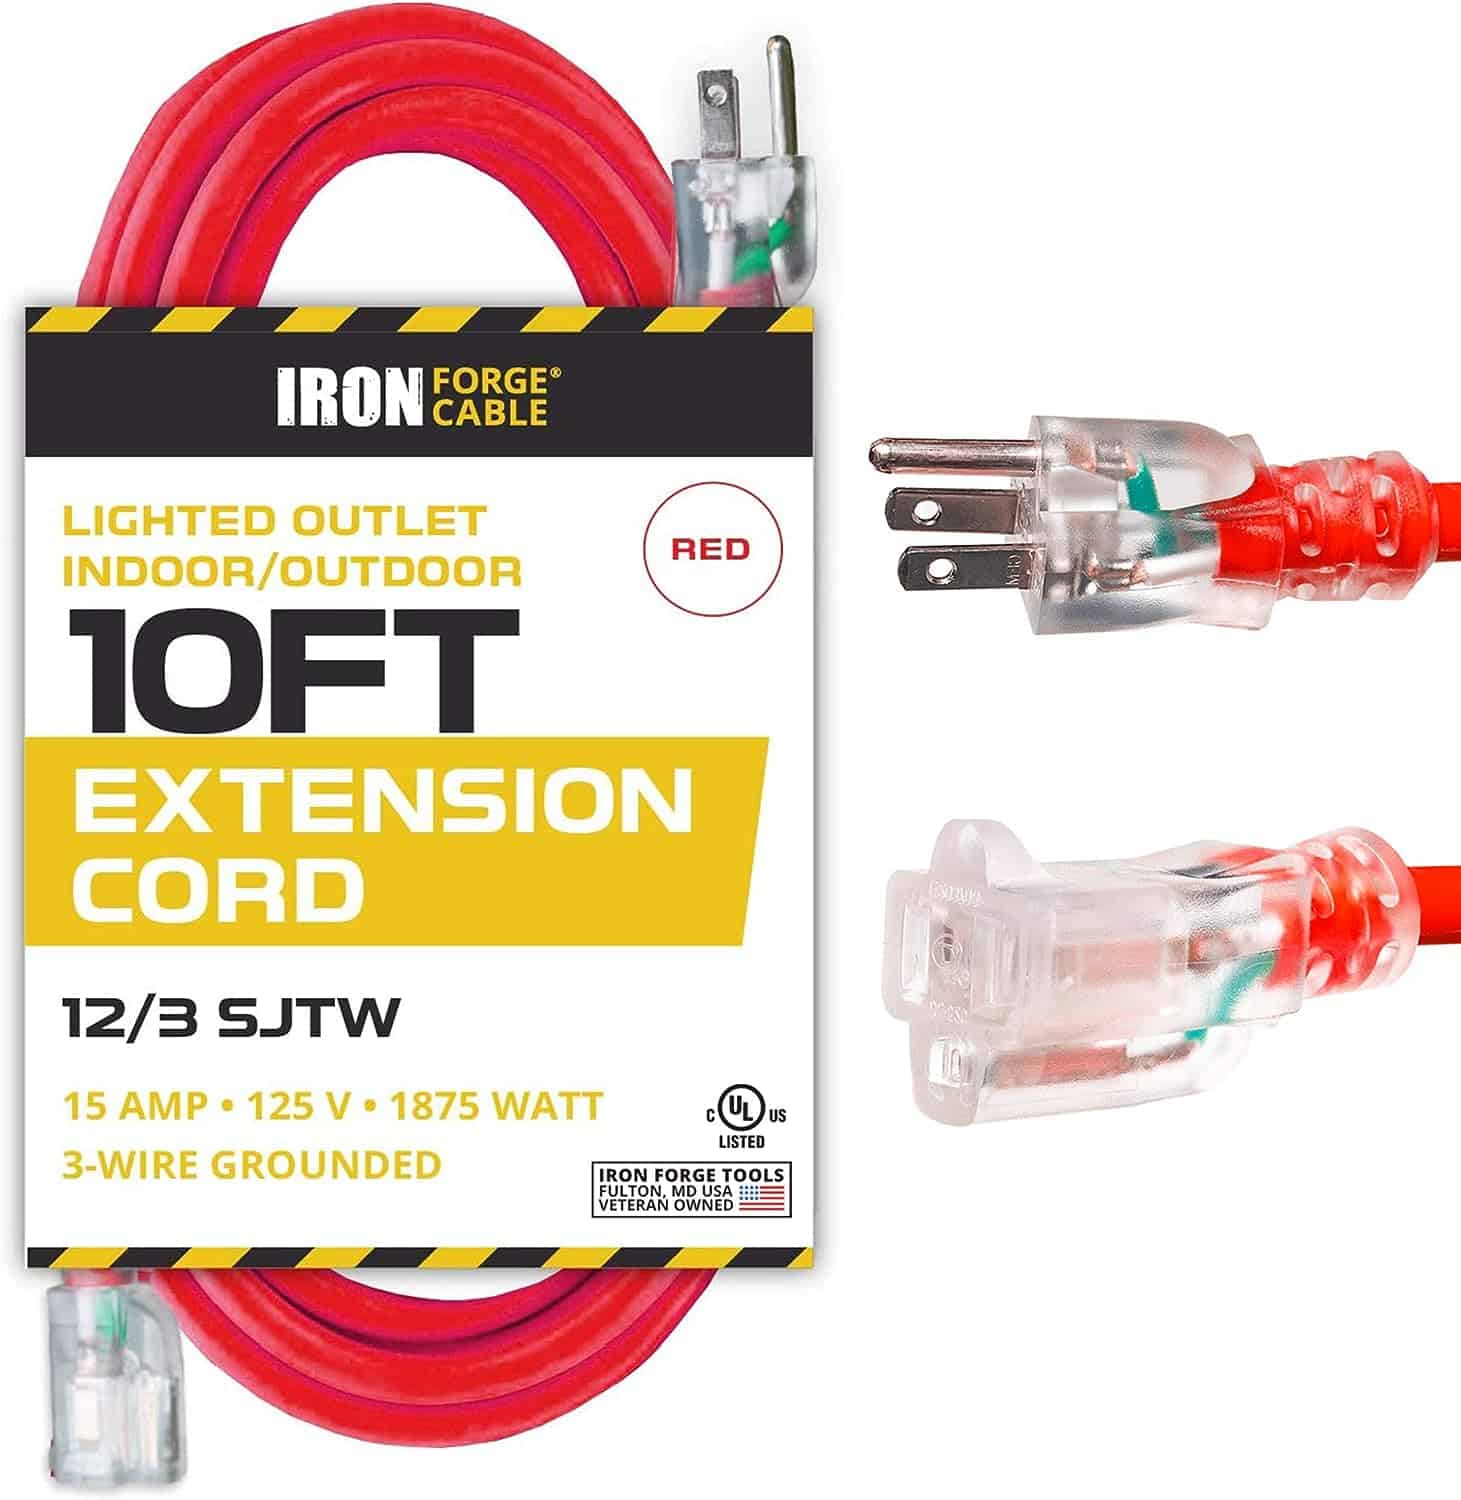 IRON-FORGE-12-Gauge-Extension-Cord-10-Ft-Lighted-Plug-12-AWG-Heavy-Duty-Extension-Cord-with-3-Prong-Construction-Grade-Red-Outdoor-Cord-12-3-SJTW-15AMP-Great-for-Major-Appliances-US-Veteran-Owned